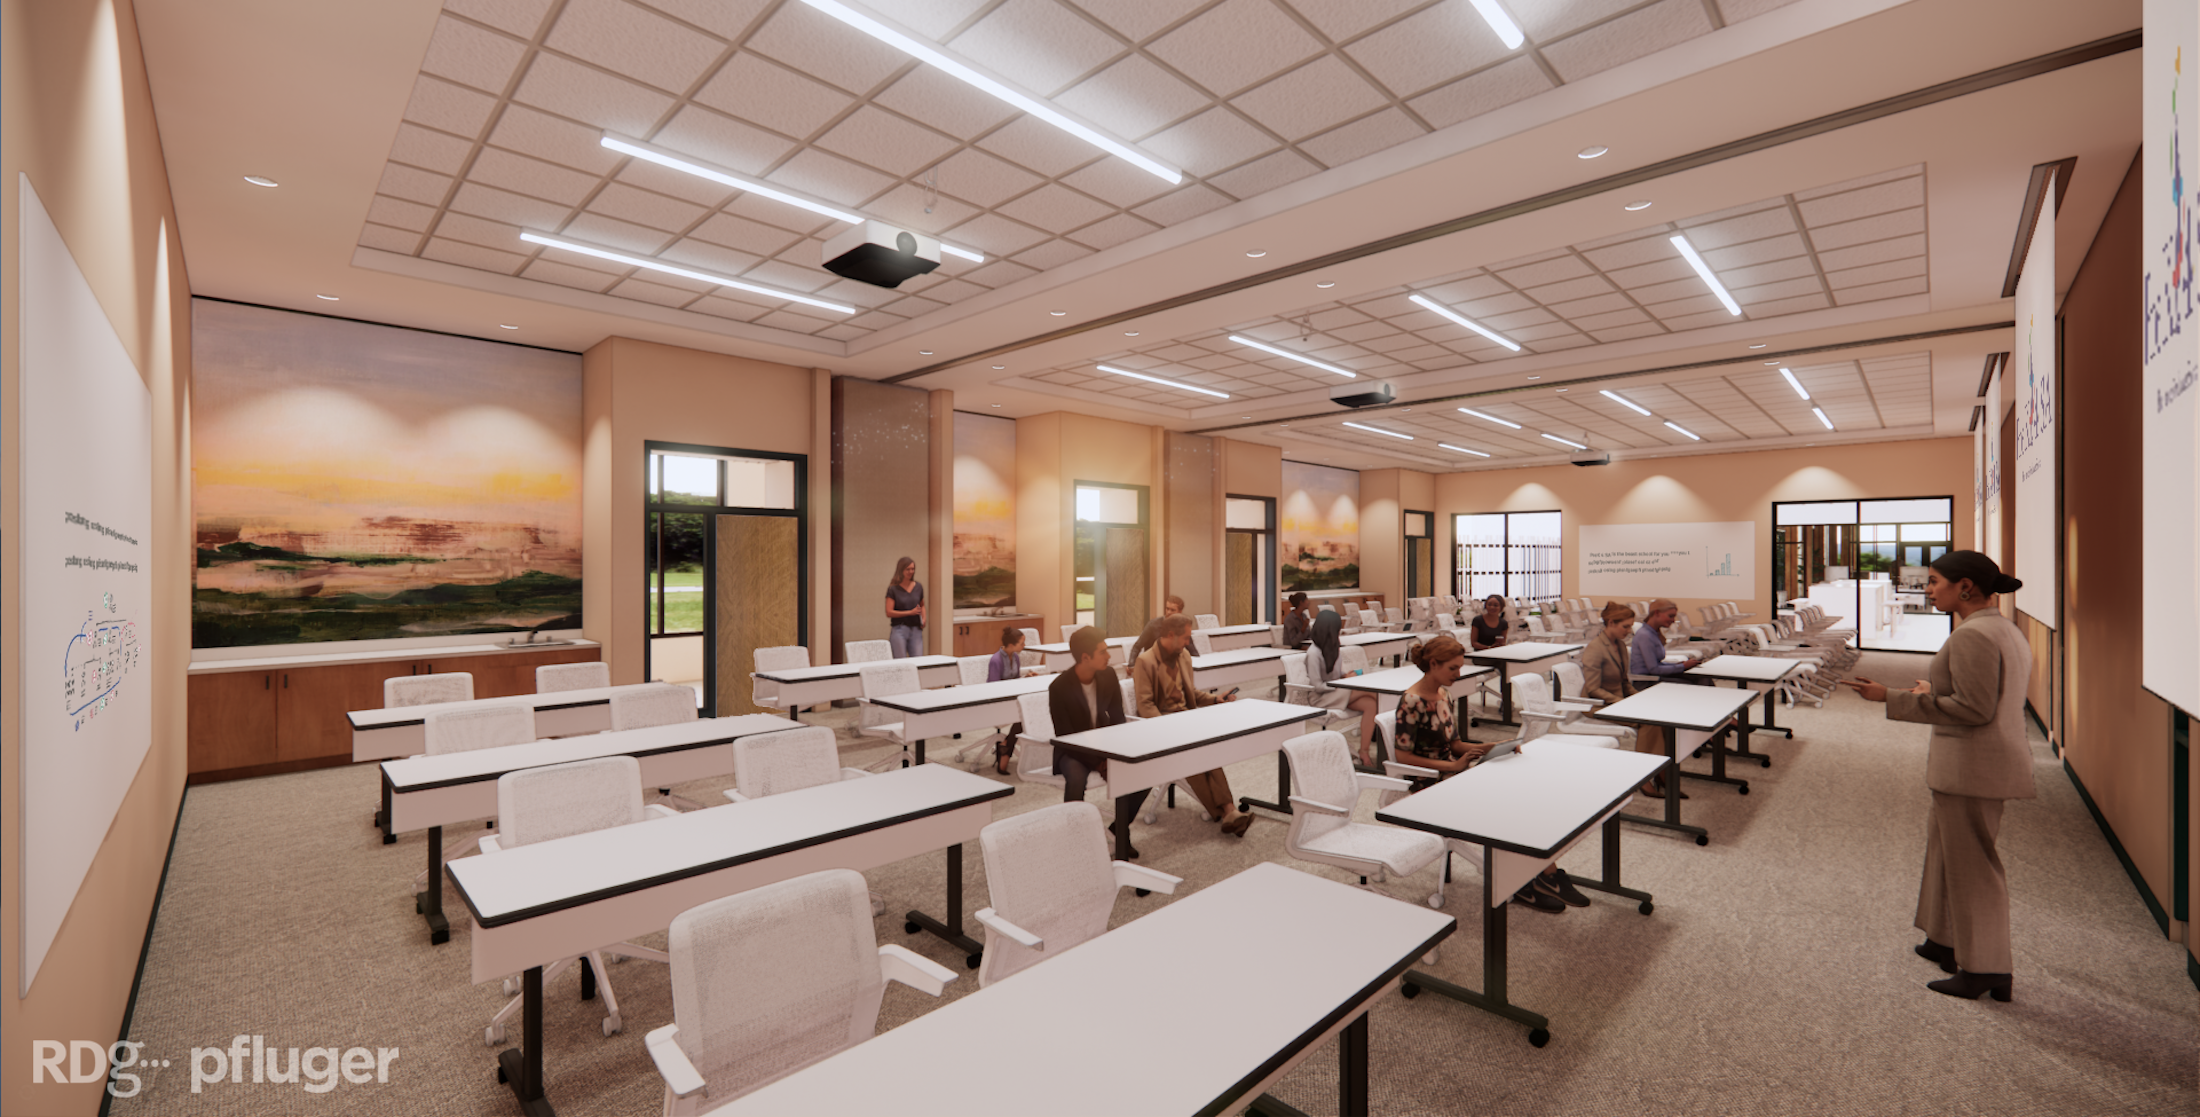 San Antonio's Pre-K 4 SA school will provide early childhood education to a traditionally under-resourced region. Rendering courtesy Pfluger Architects